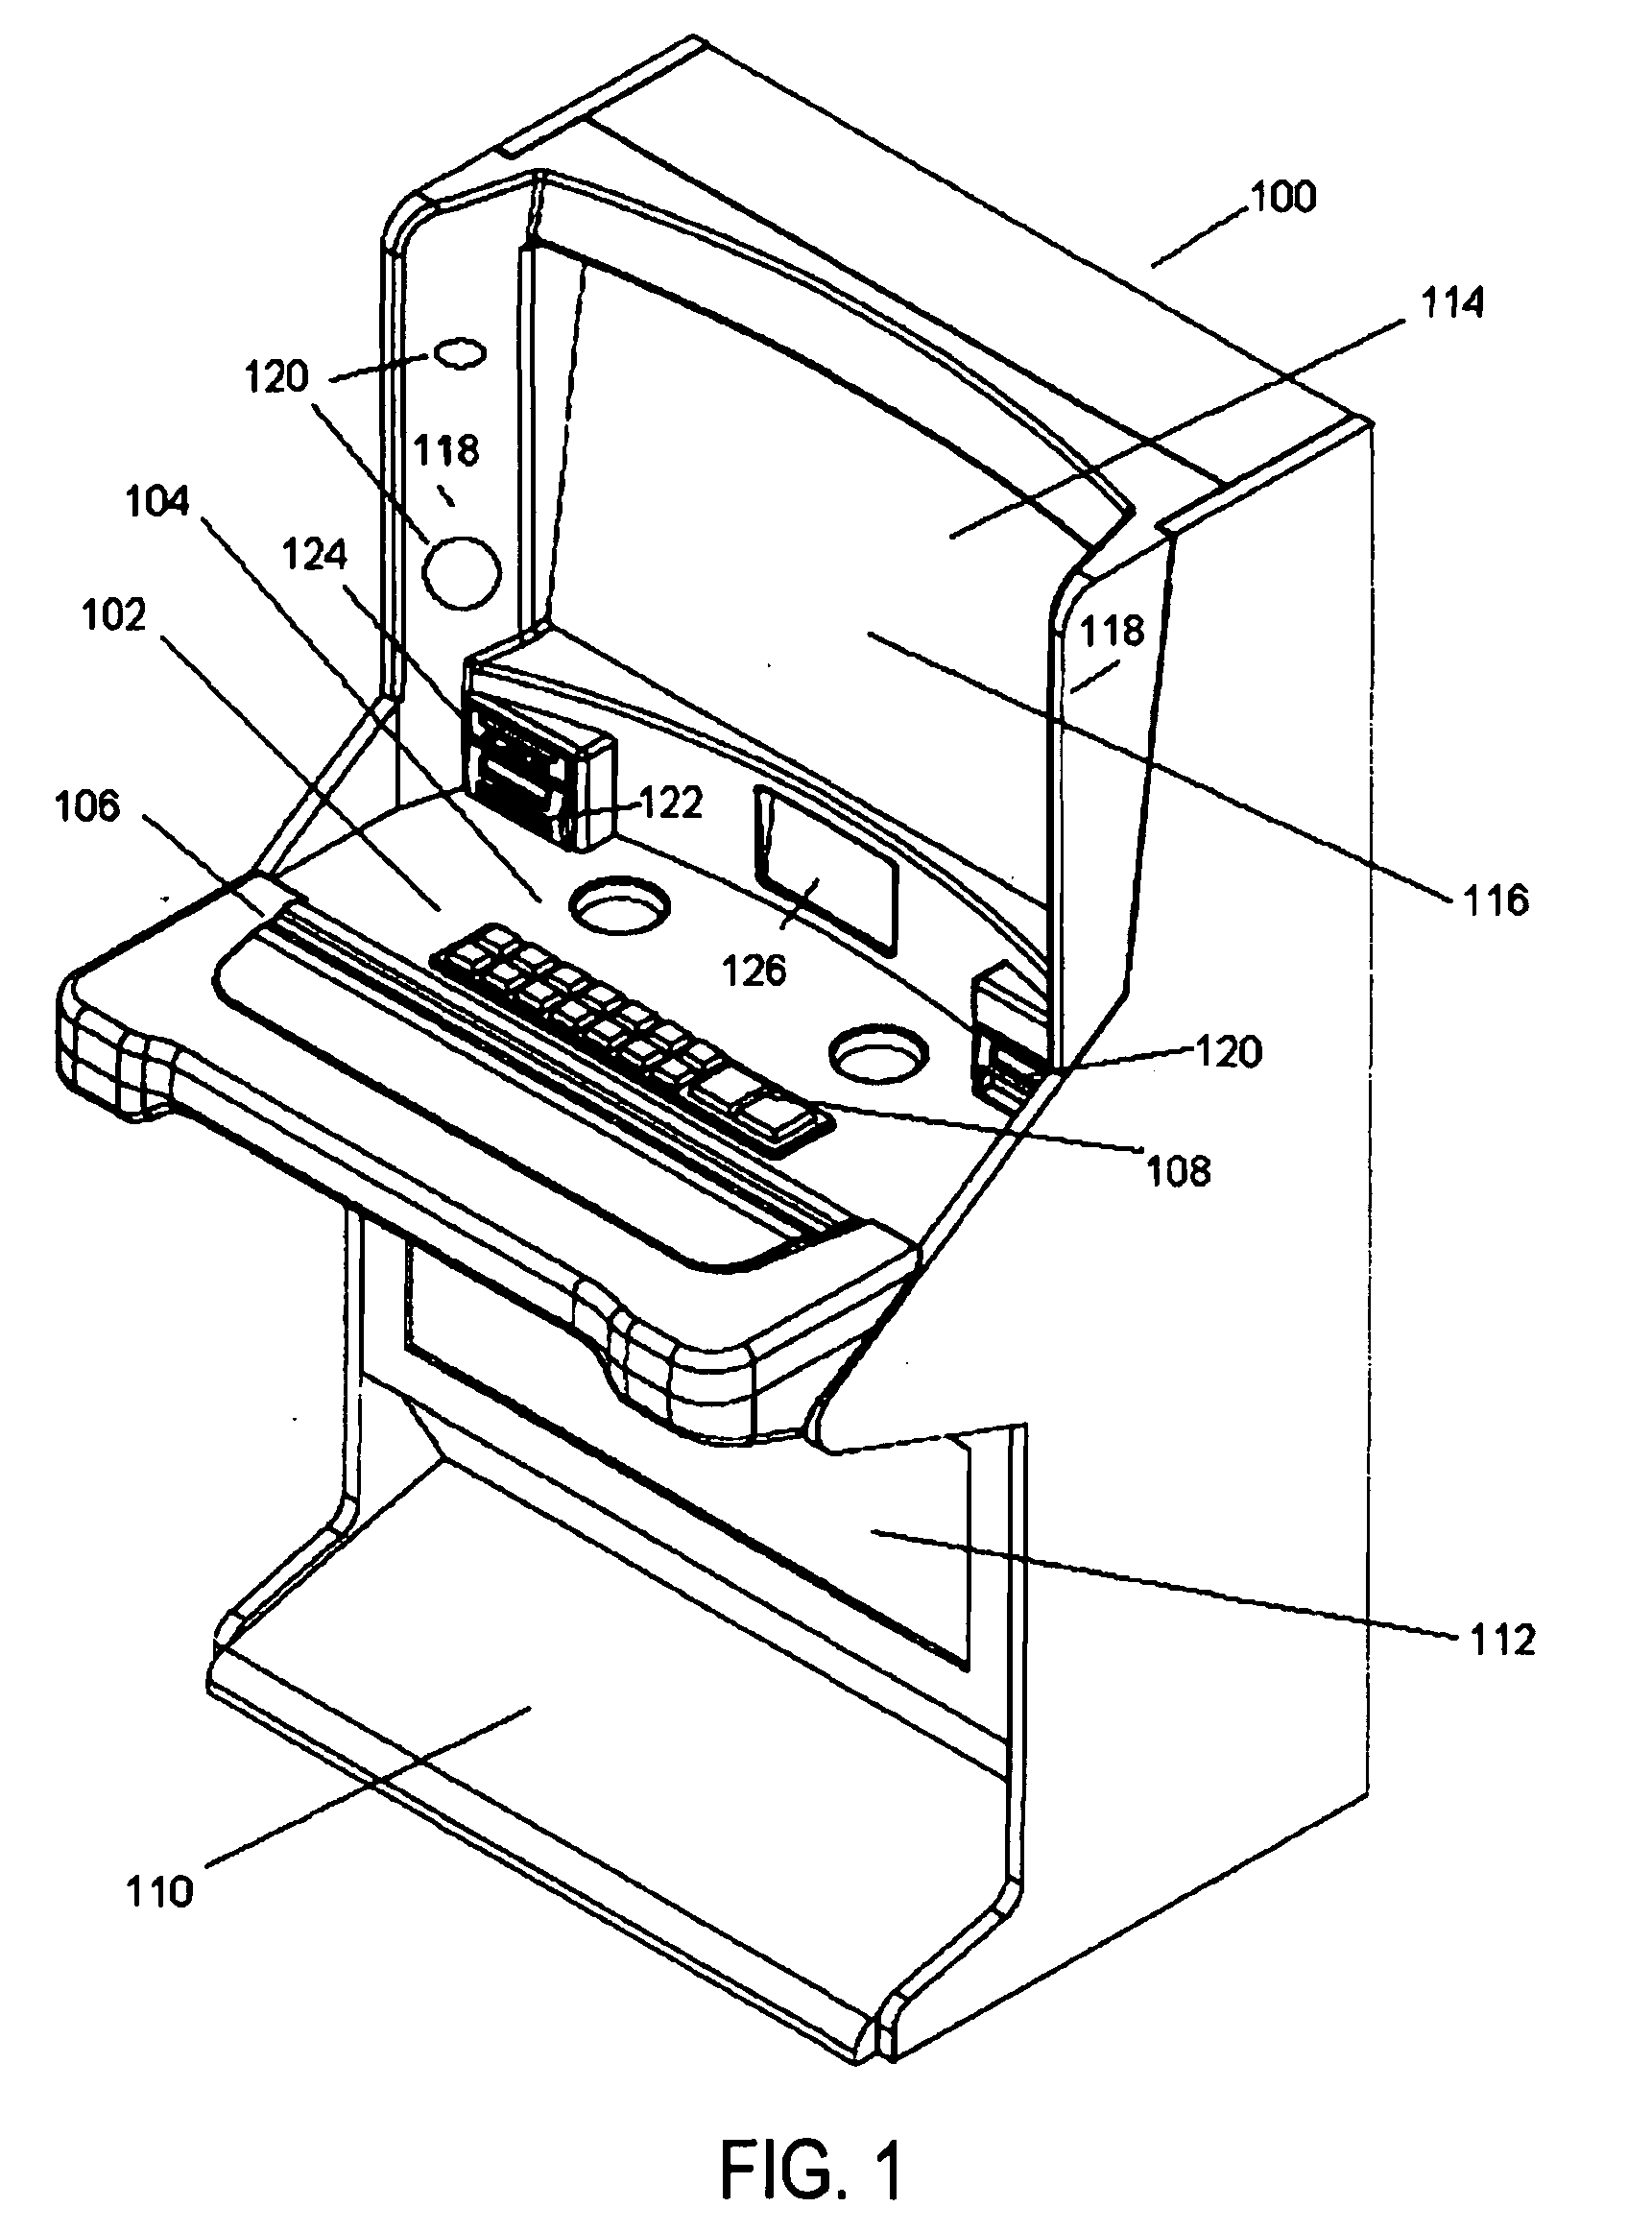 Networked Gaming System With Ergonomic Gaming Machine Having Electromechanical Reels